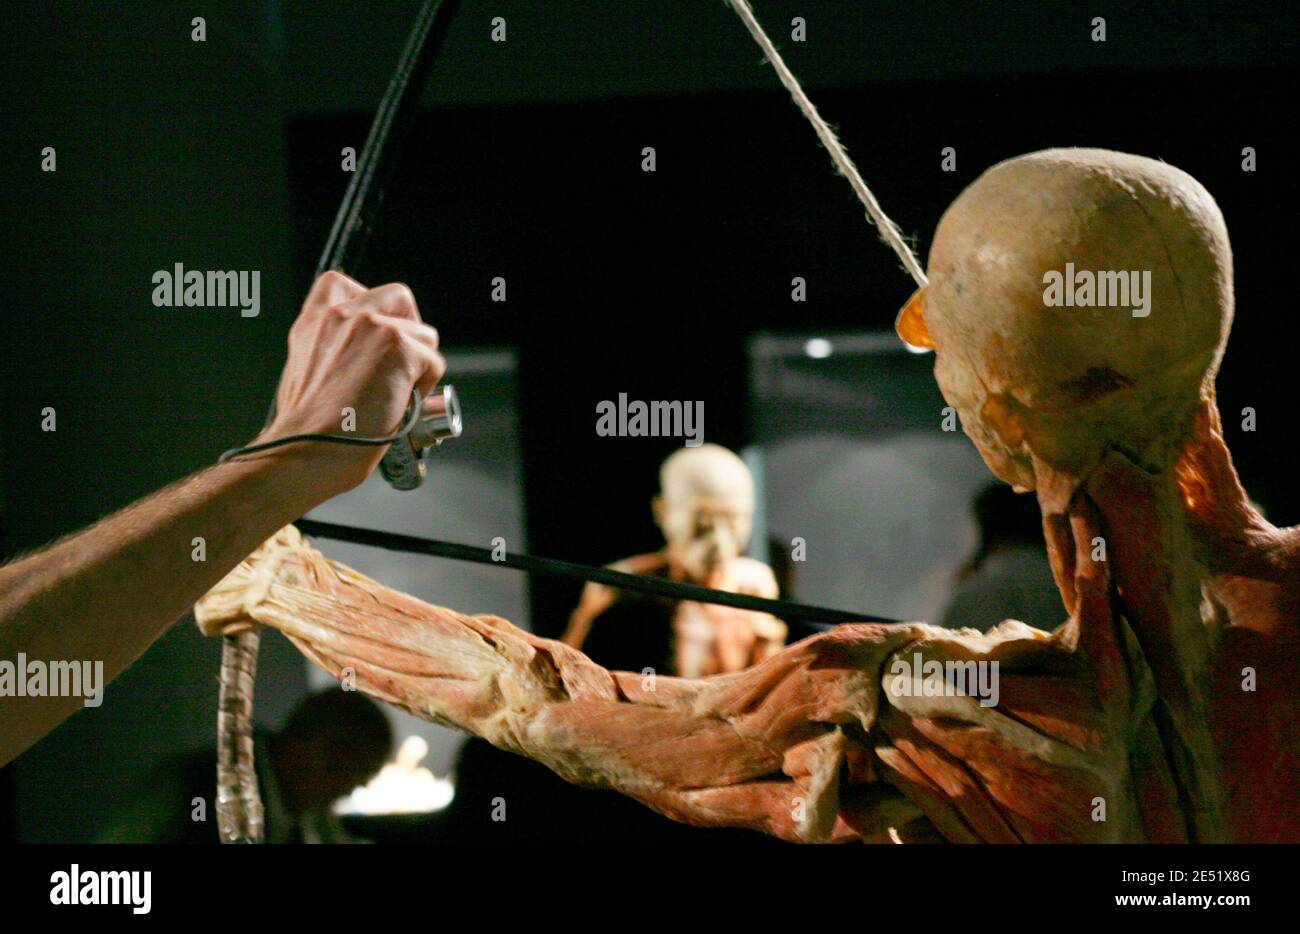 'Our Body exhibition in Lyon, France on May 29, 2008. Consisting of actual human bodies and organs this exhibit literally goes ''under the skin'', revealing the mysteries of the human anatomy. The bodies, specimens and organs have been preserved using a process known as polymer impregnation. Photos by Vincent Dargent/ABACAPRESS.COM' Stock Photo